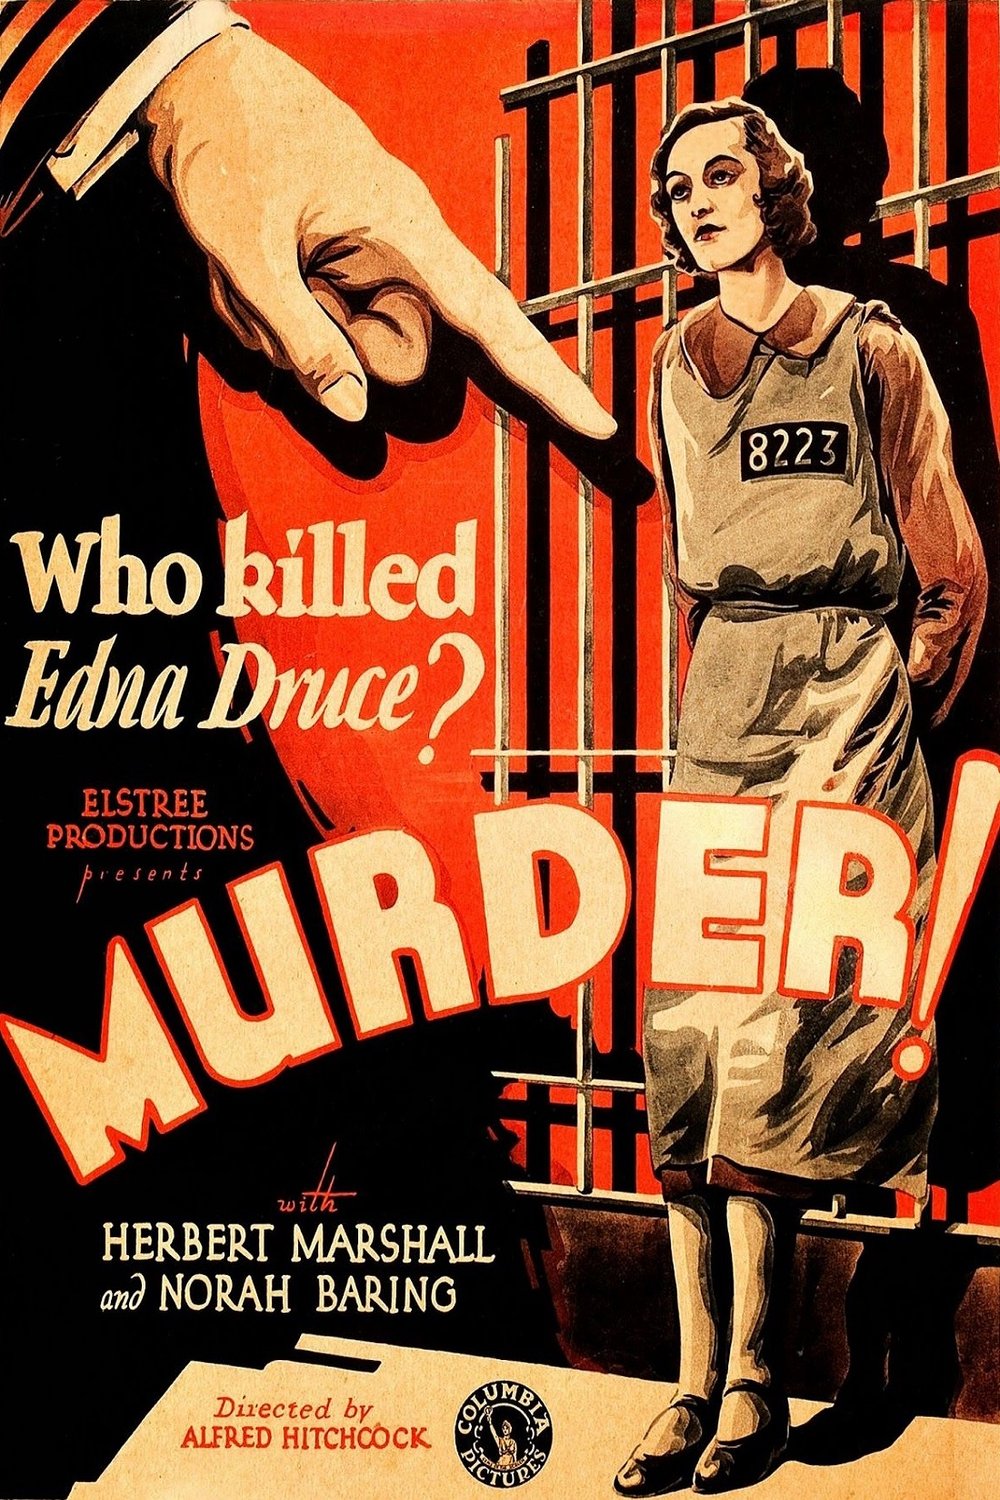 Poster of the movie Murder!